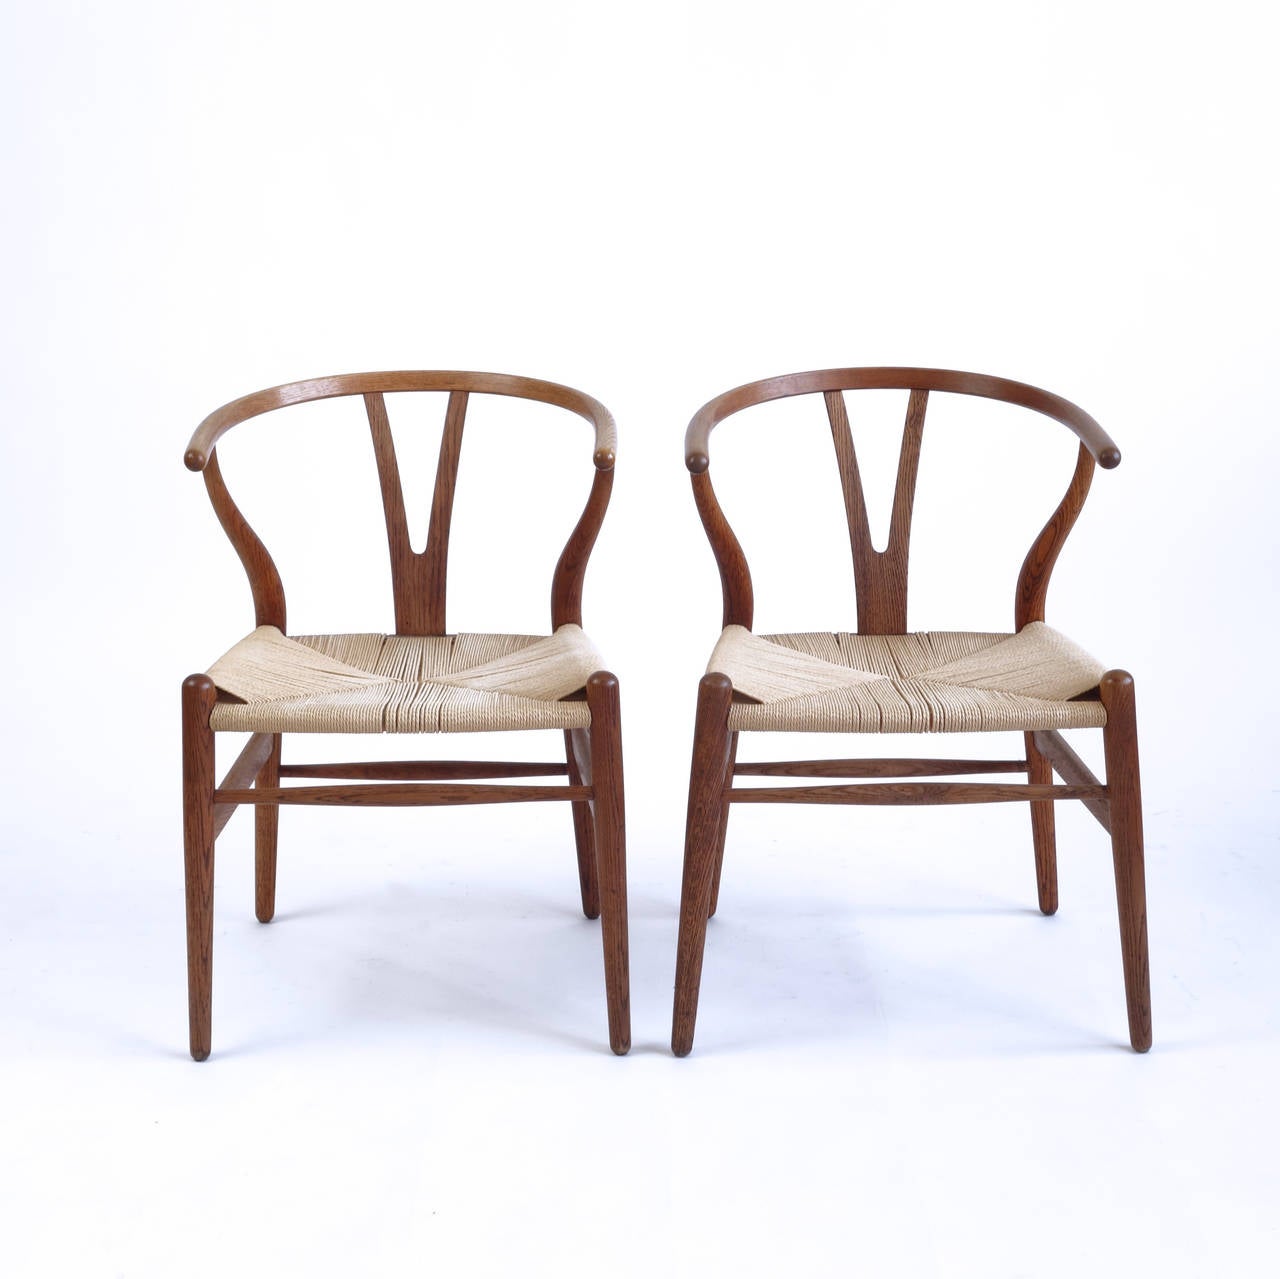 The Wishbone chair was one of Hans Wegner's first designs for Carl Hansen & Son, in 1949, and has been in continuous production since 1950. It was one of a series of designs that Wegner based on portraits of Danish merchants seated in ming